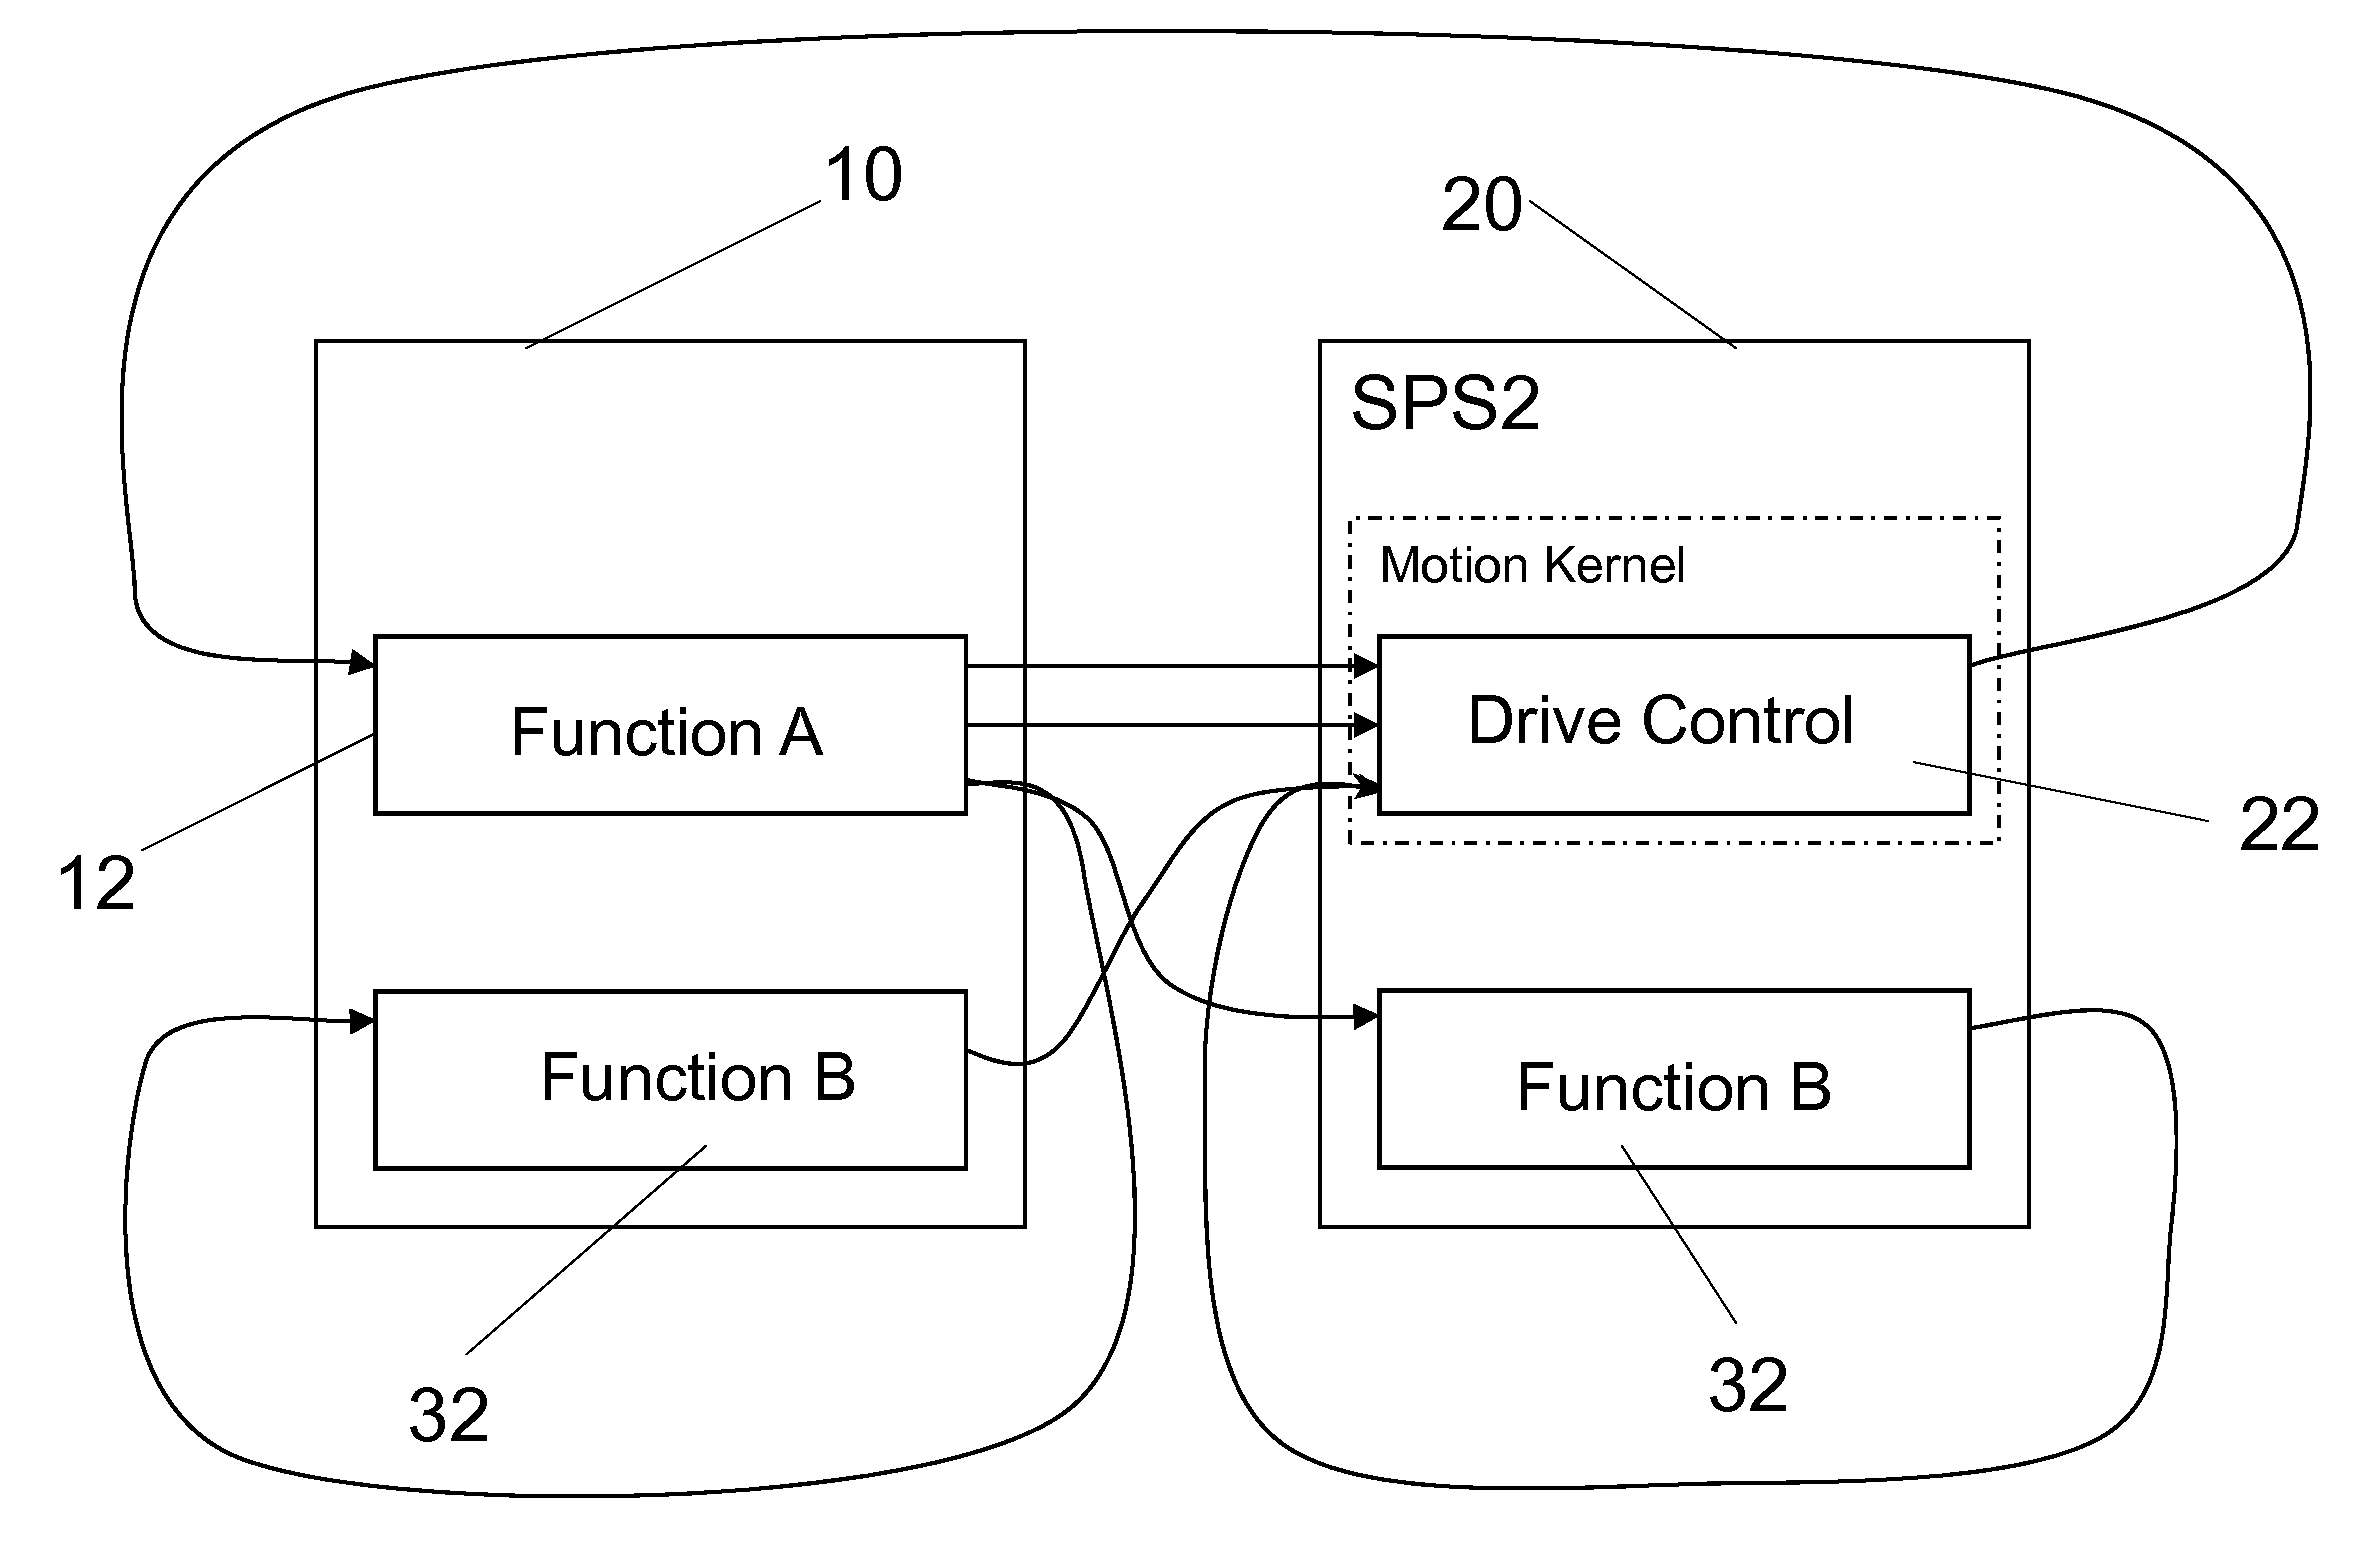 Method and system for the dynamic allocation of program functions in distributed control systems